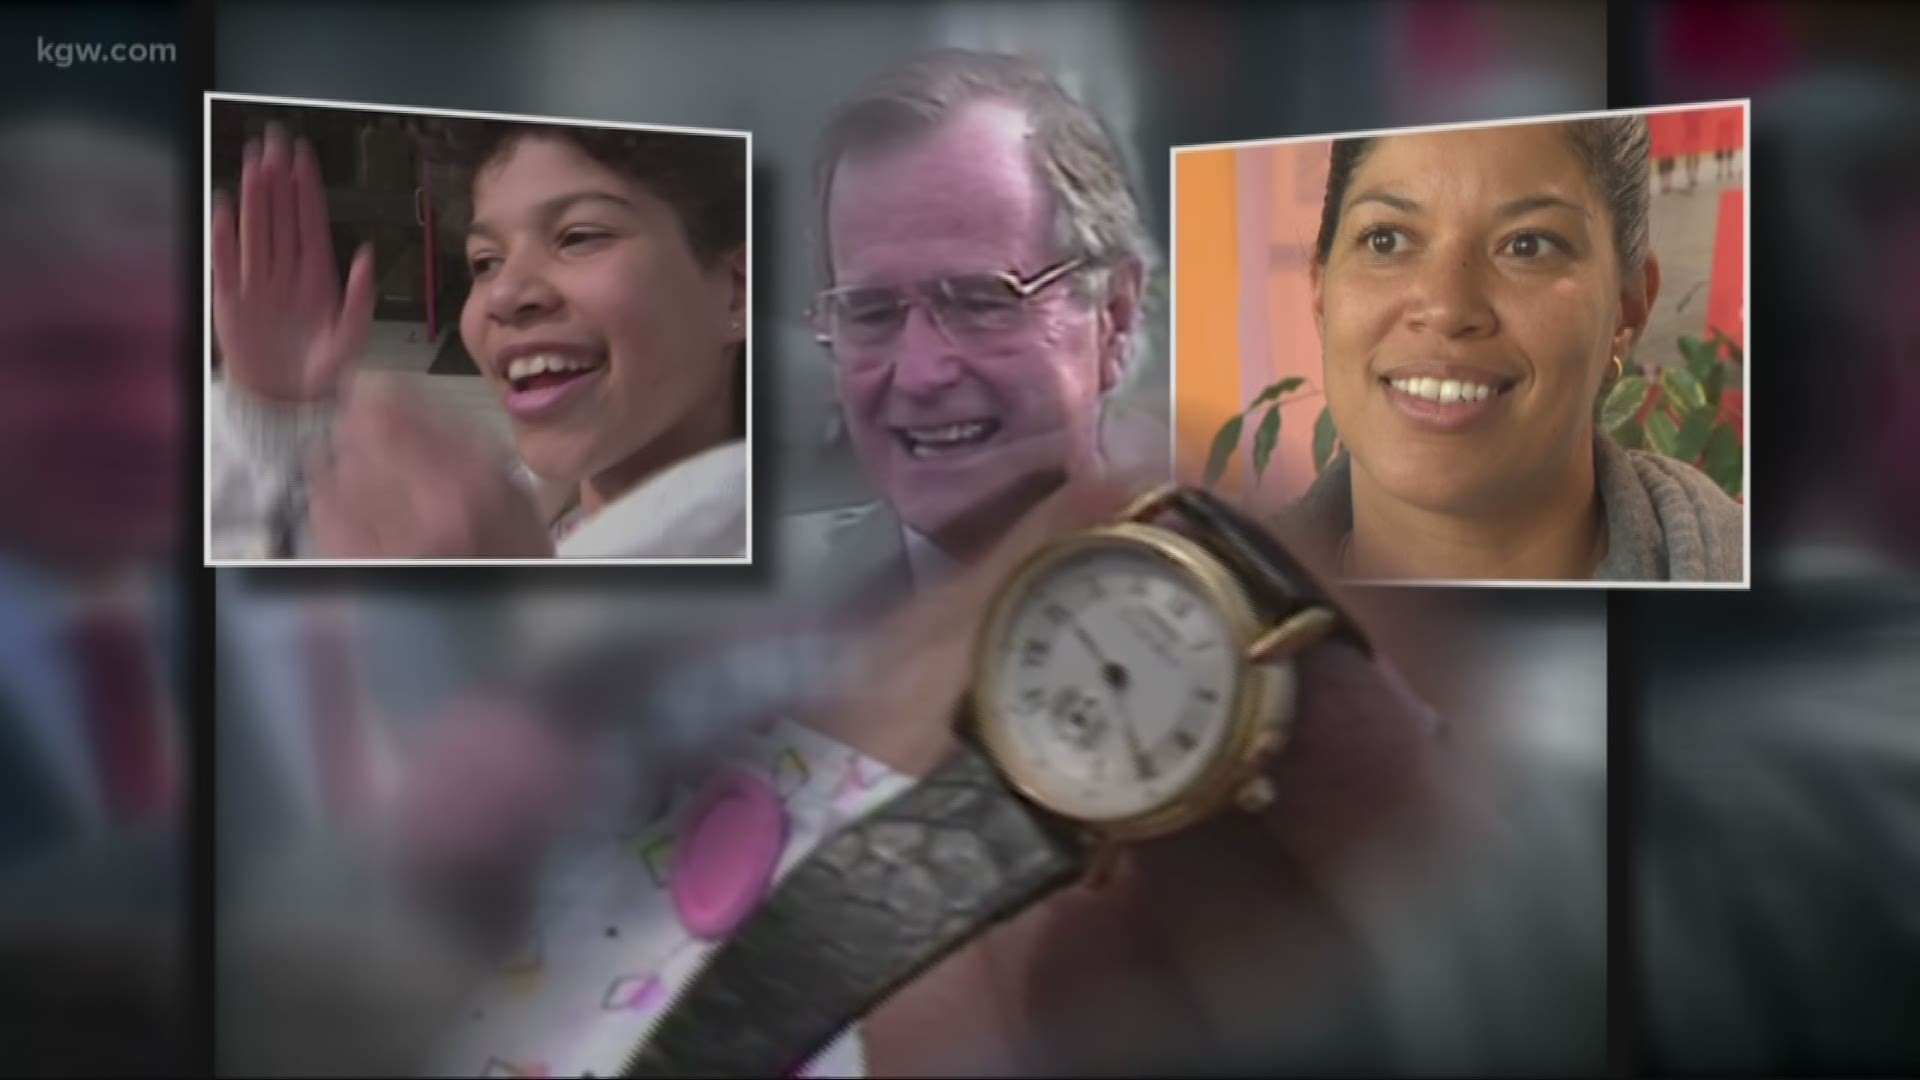 We caught up with the girl who got President George H.W. Bush's watch.